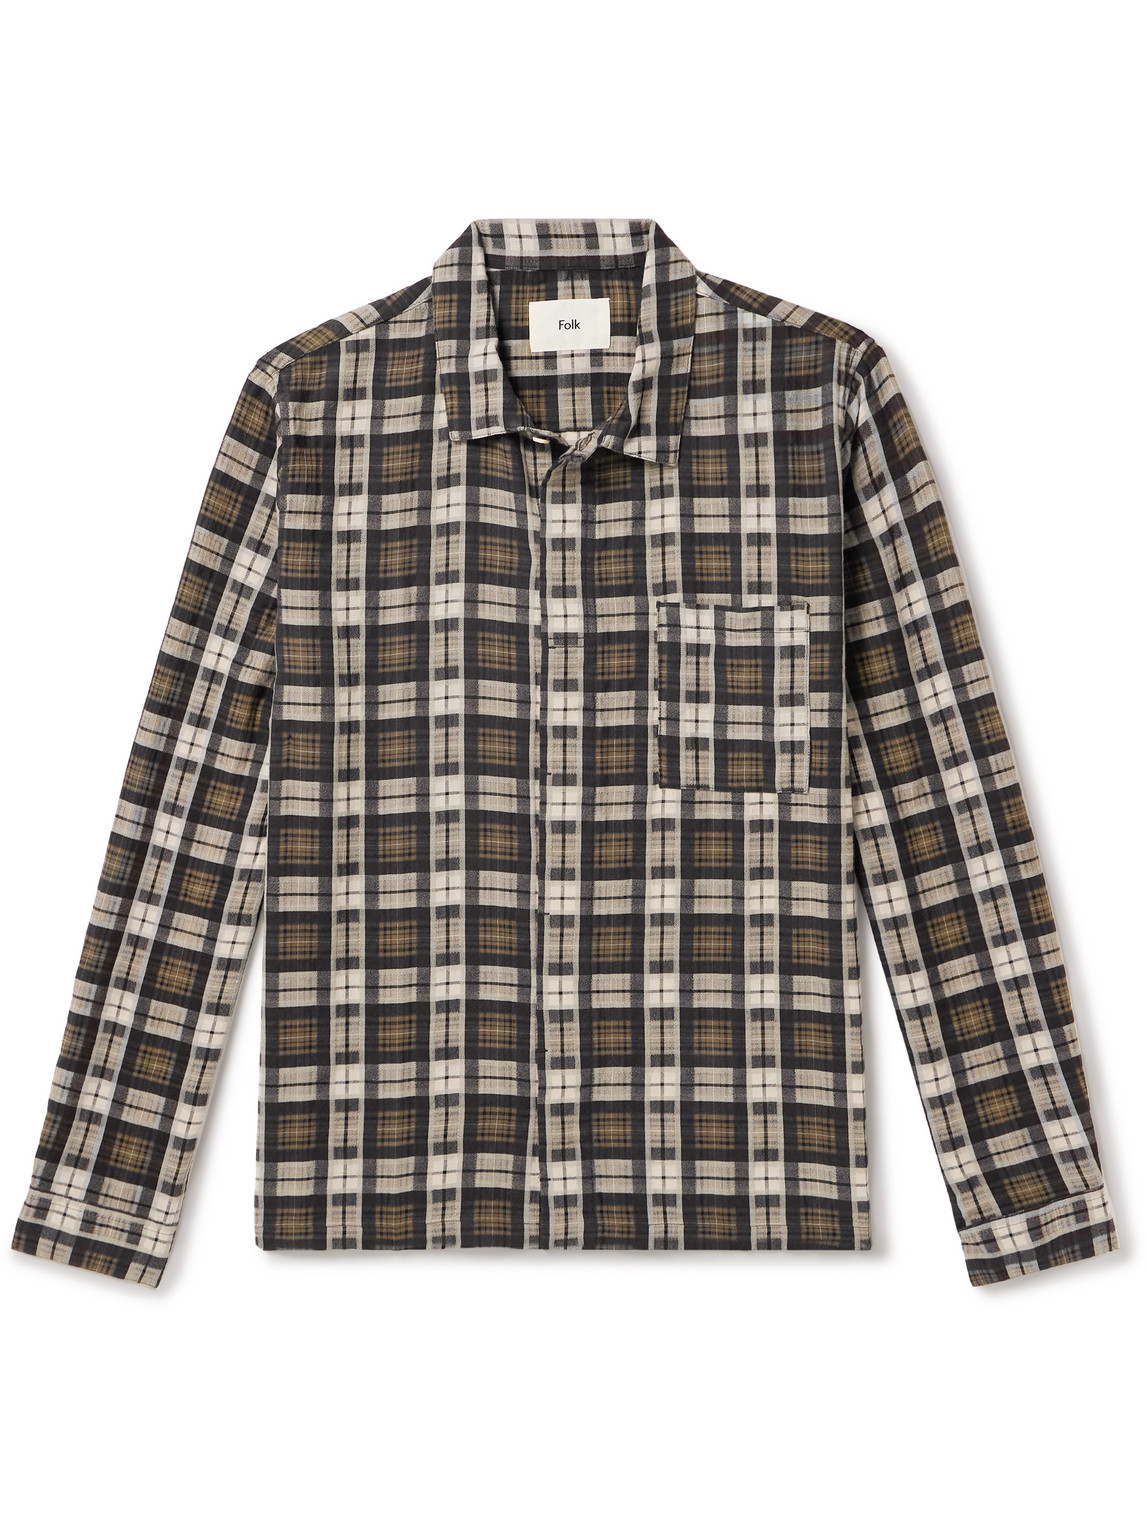 Folk Patch Checked Cotton-blend Shirt In Black